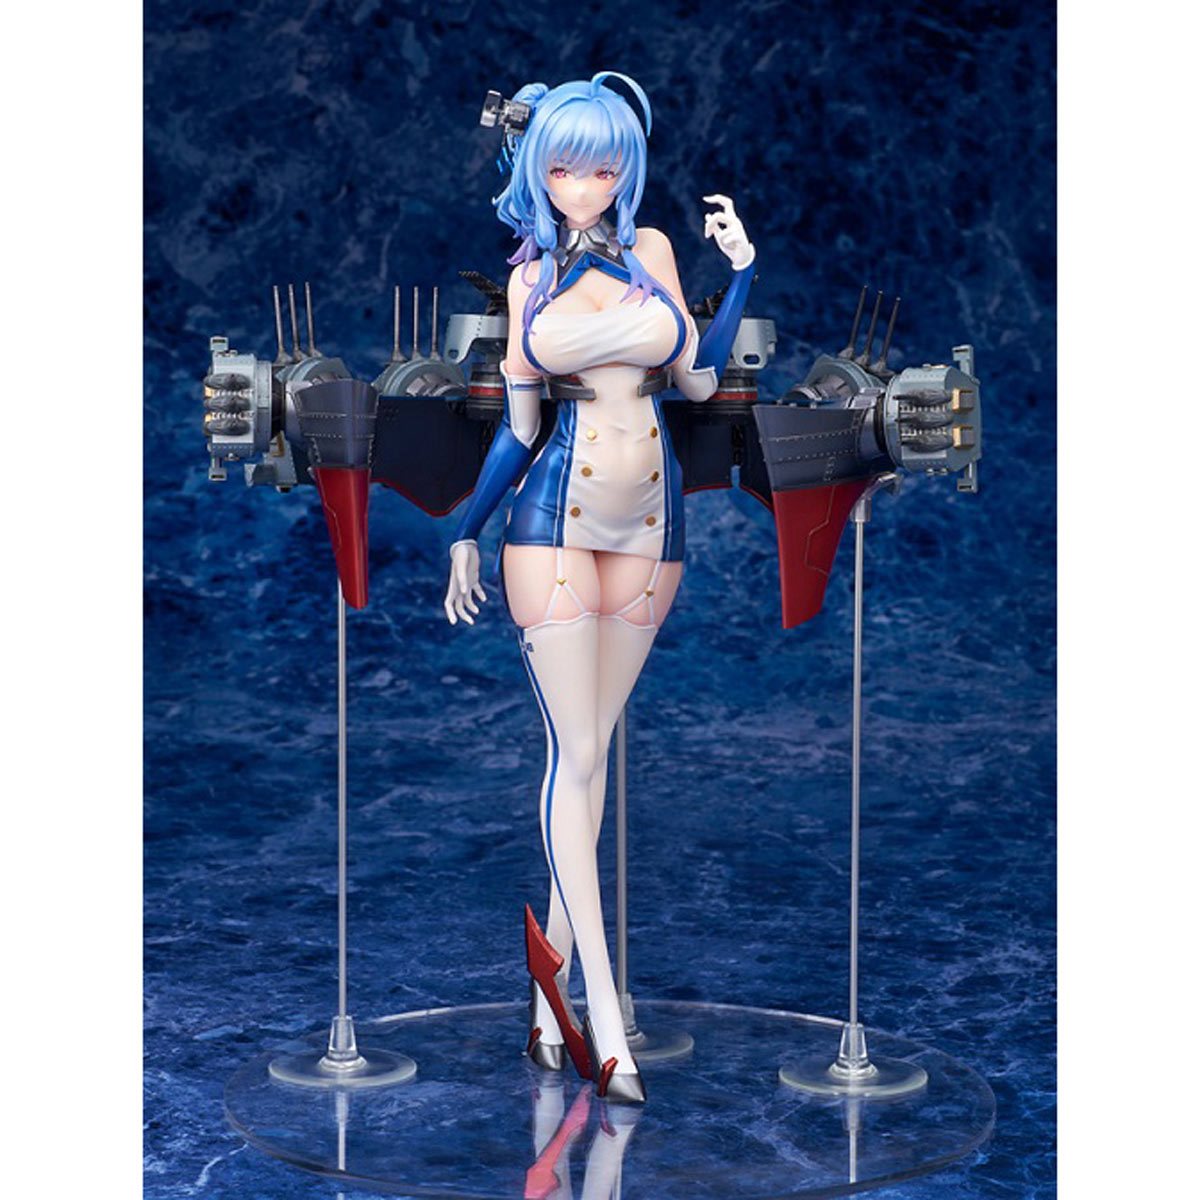 Buy Azur Lane St. Louis 1:7 Scale Statue at Entertainment Earth. Mint  Condition Guaranteed. FREE SHIPPING on eligible purchases. Shop now! #s…